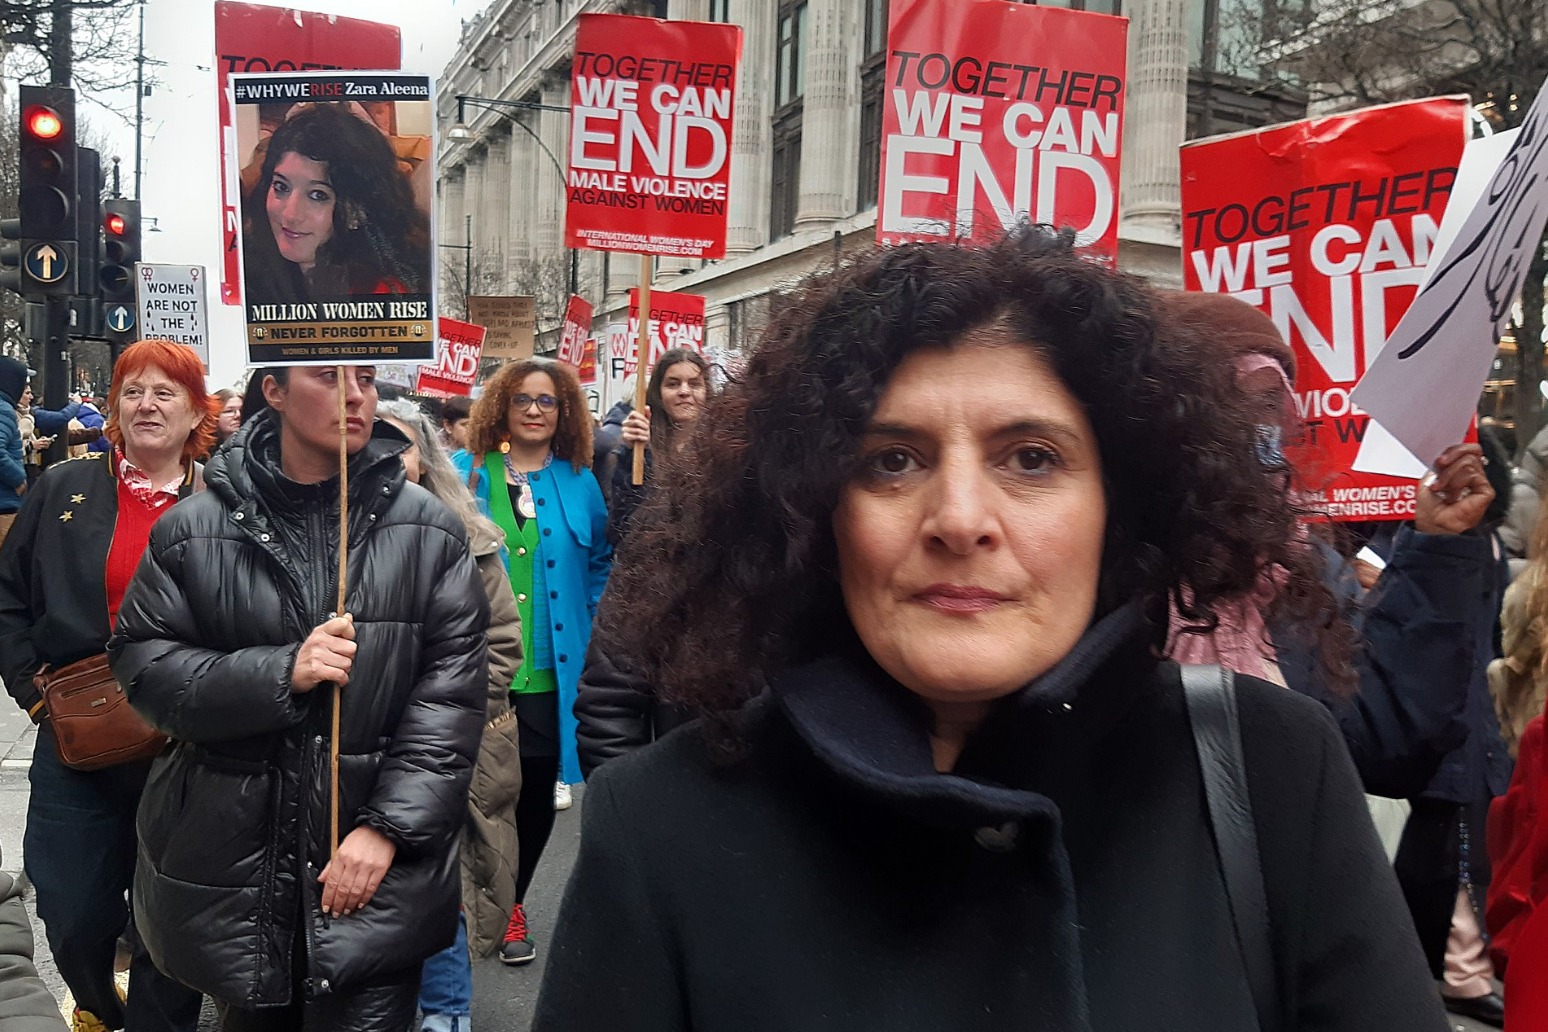 Aunt of murdered lawyer Zara Aleena joins march calling for end to male violence 